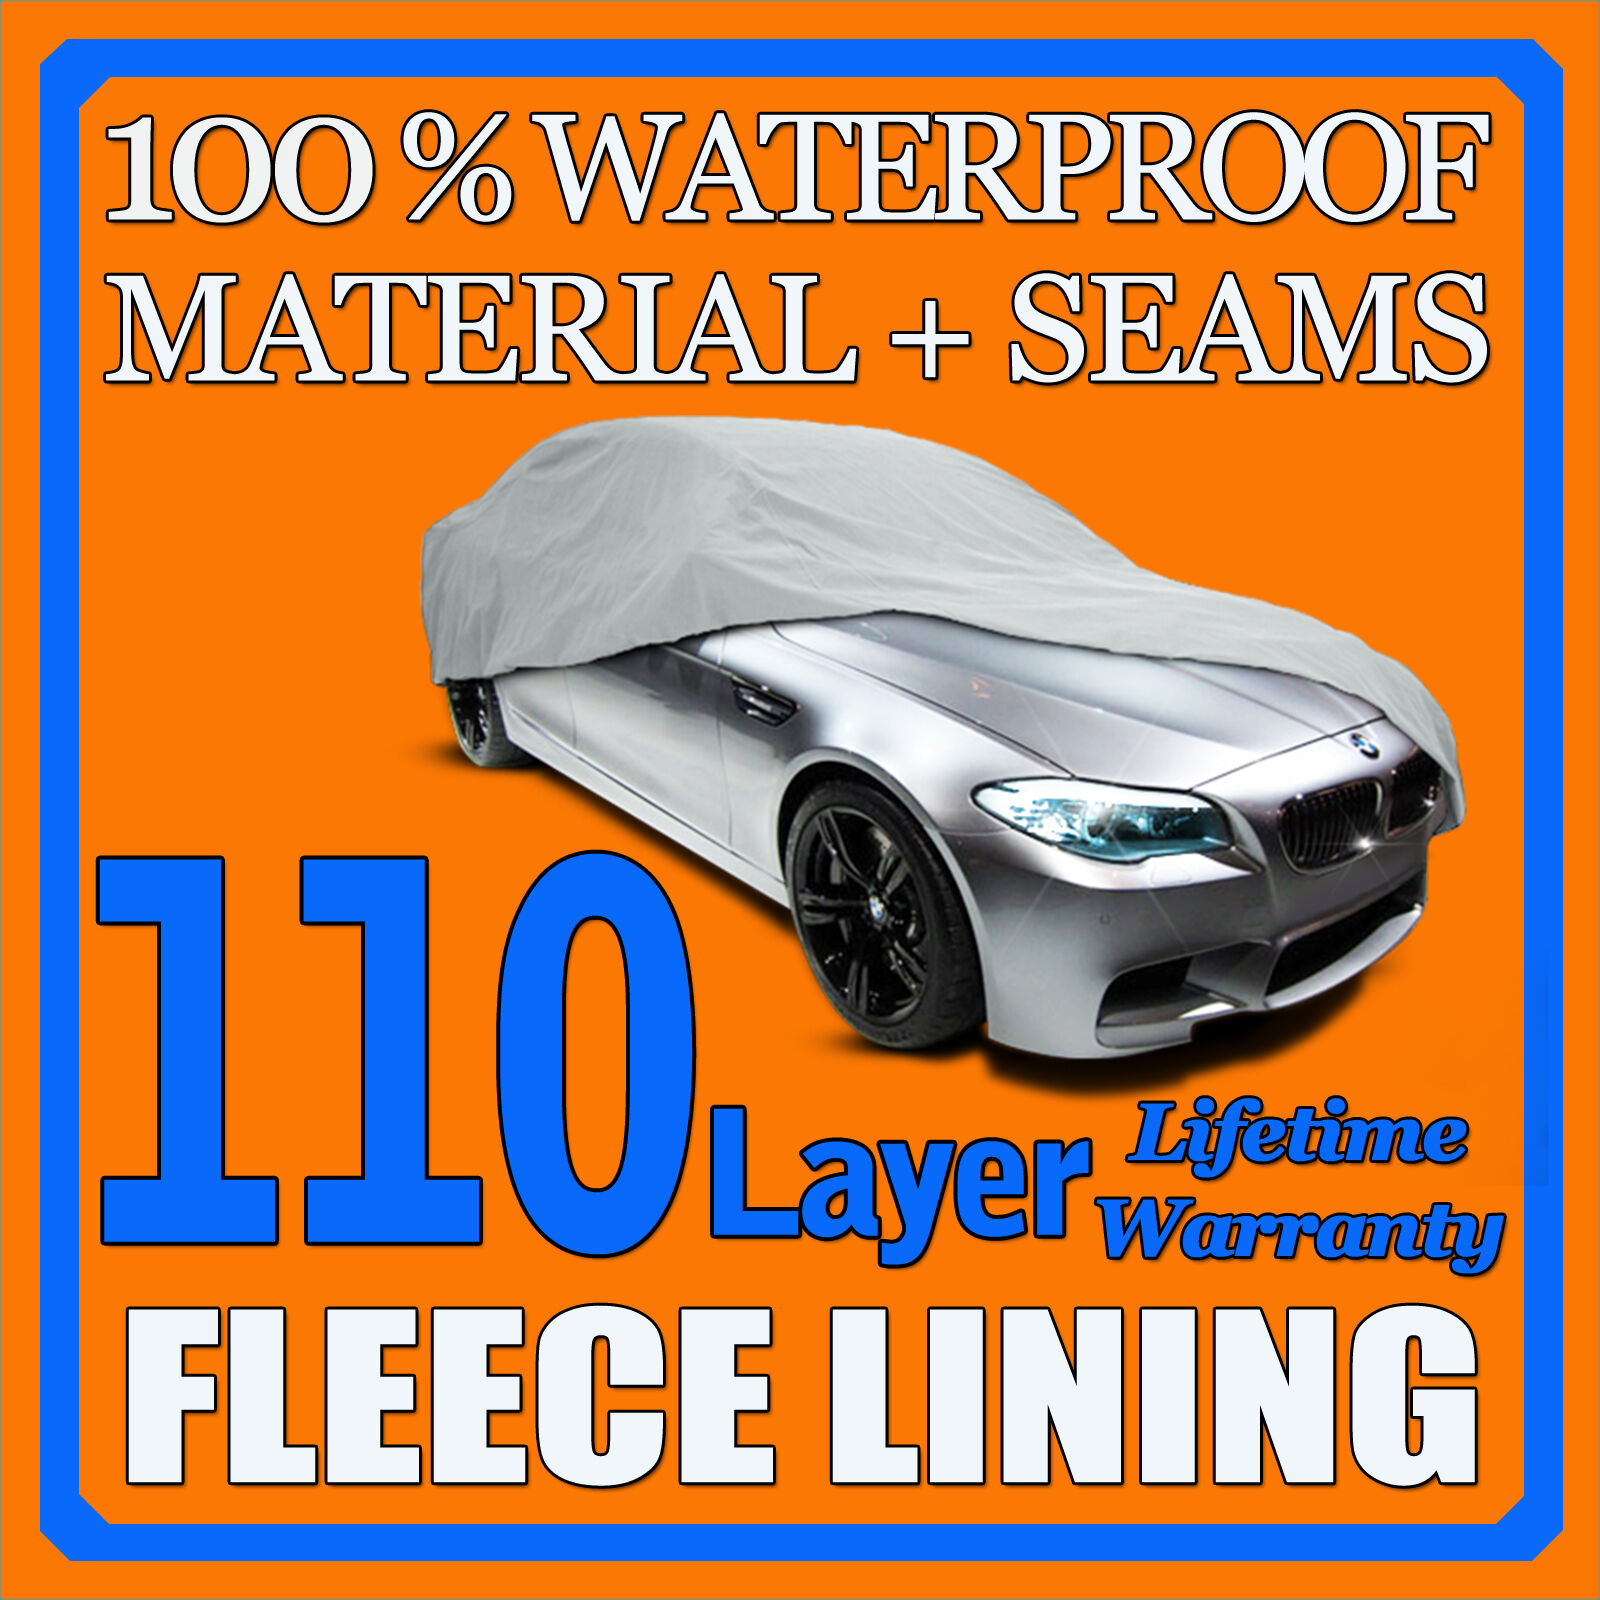 110 Layer Car Cover Outdoor Waterproof Scratchproof Breathable 60 70 80 90 100 E